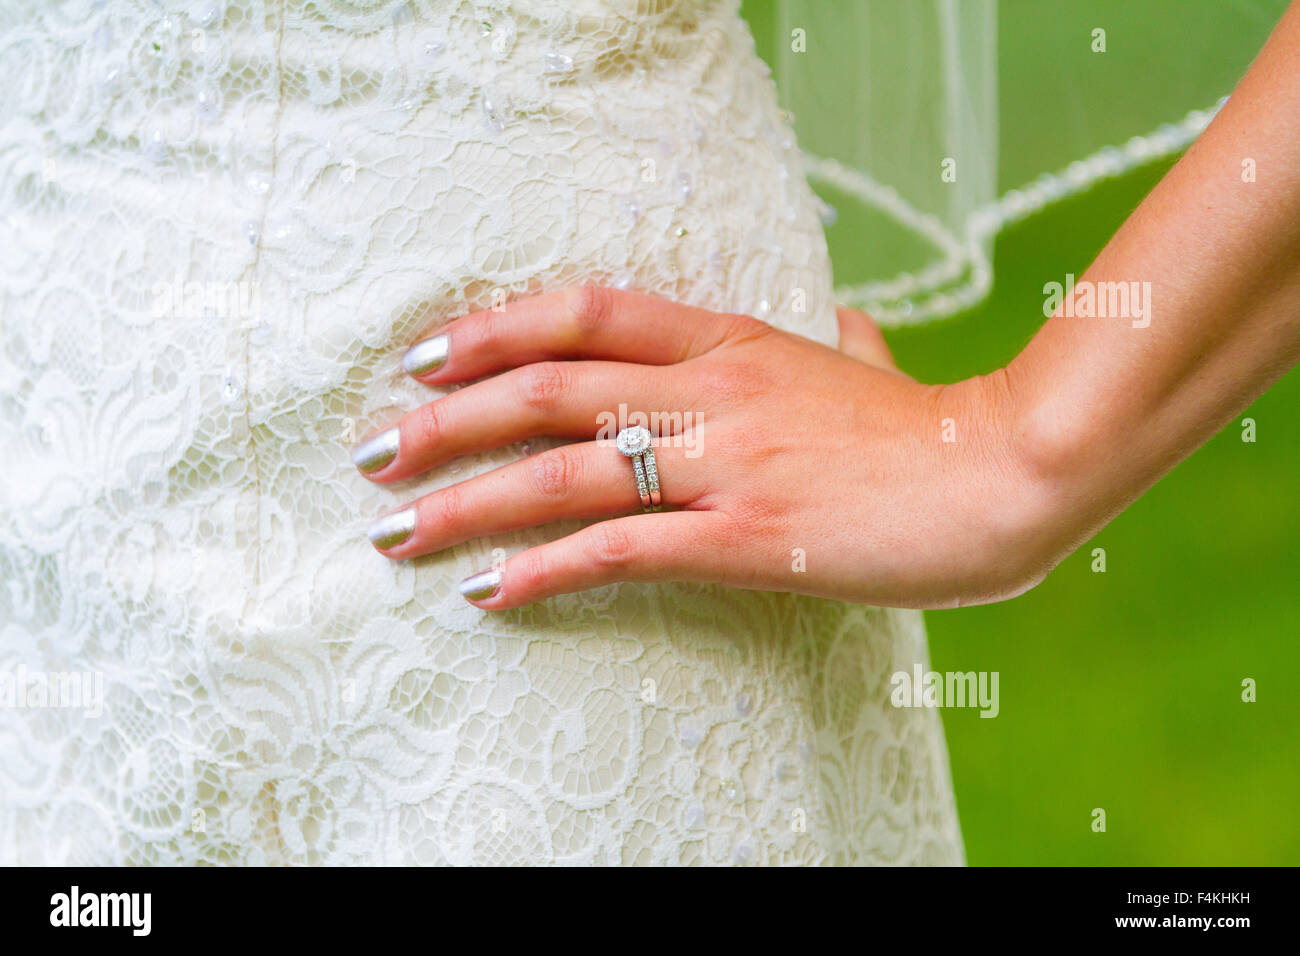 Hand of the bride on her hips with wedding dress and ring showing. Stock Photo